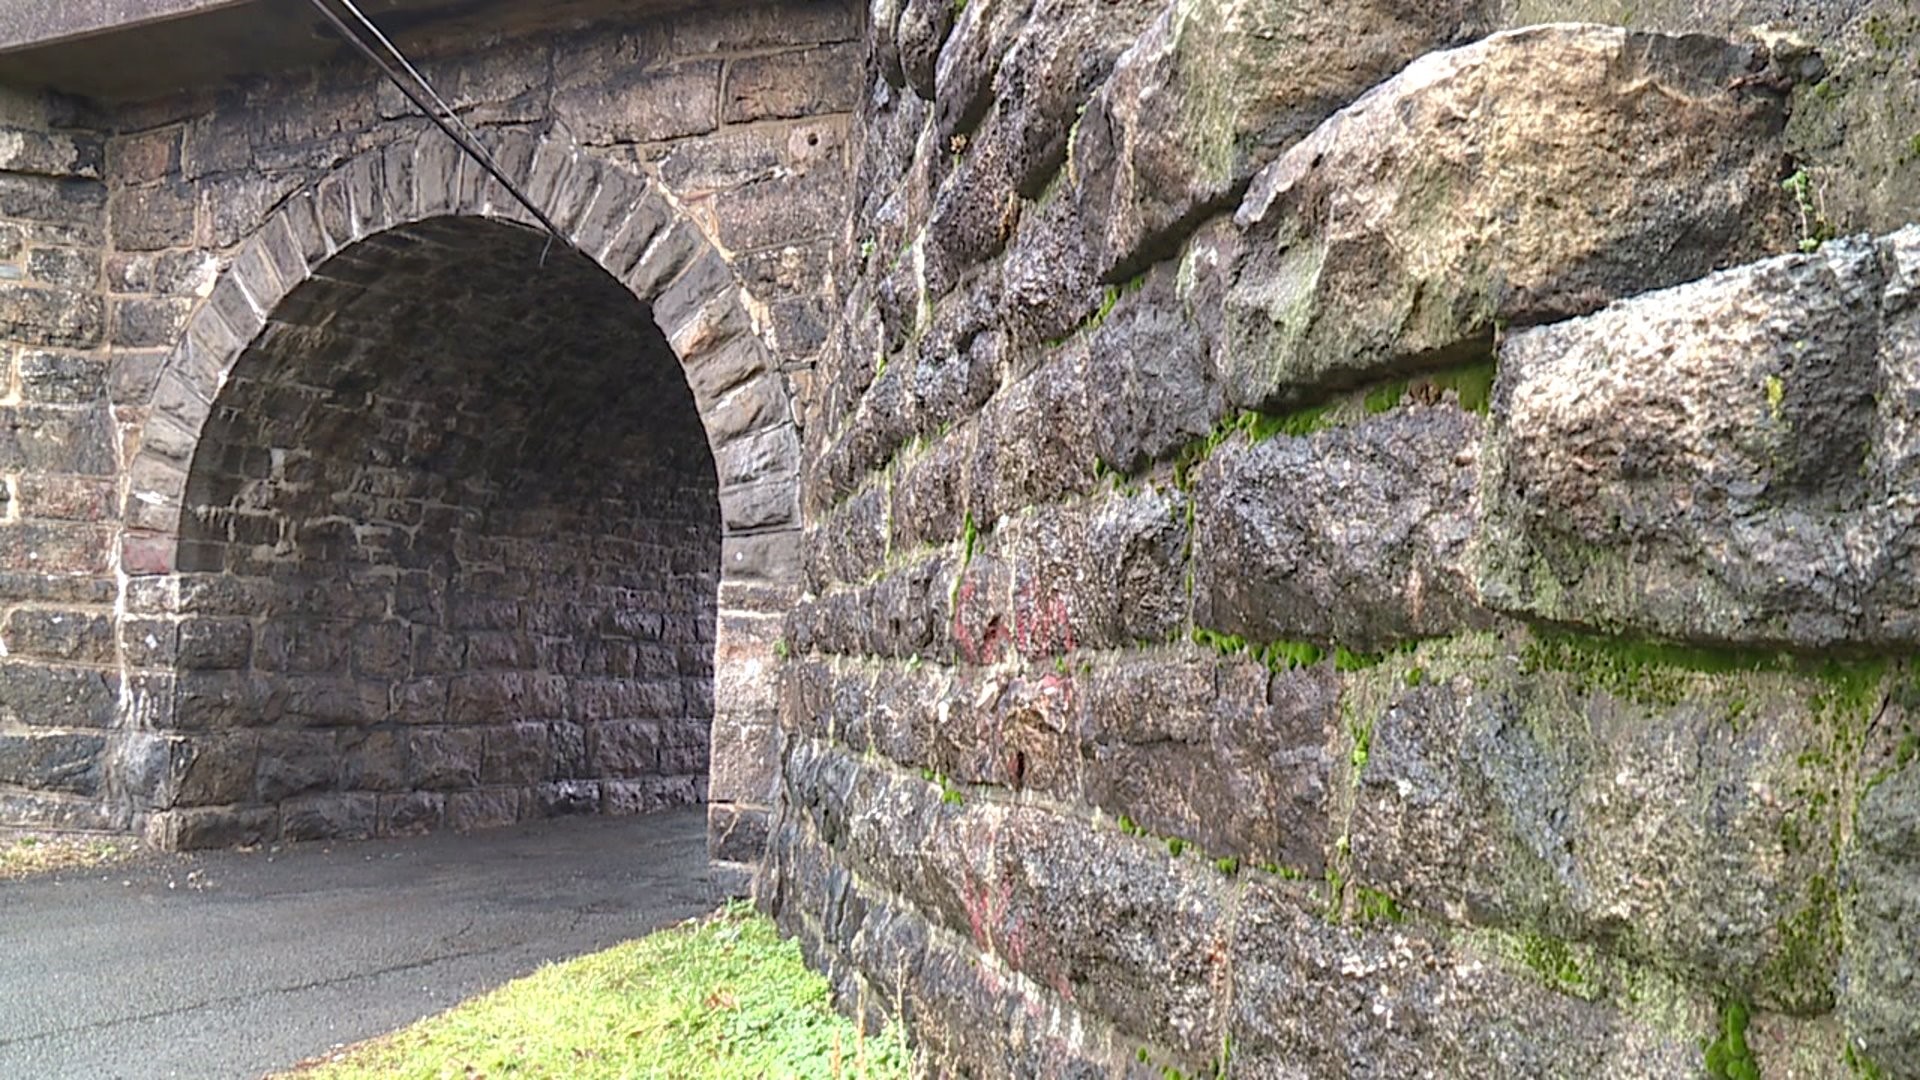 Some say the fight over an old railroad bridge in Luzerne county isn't over yet.